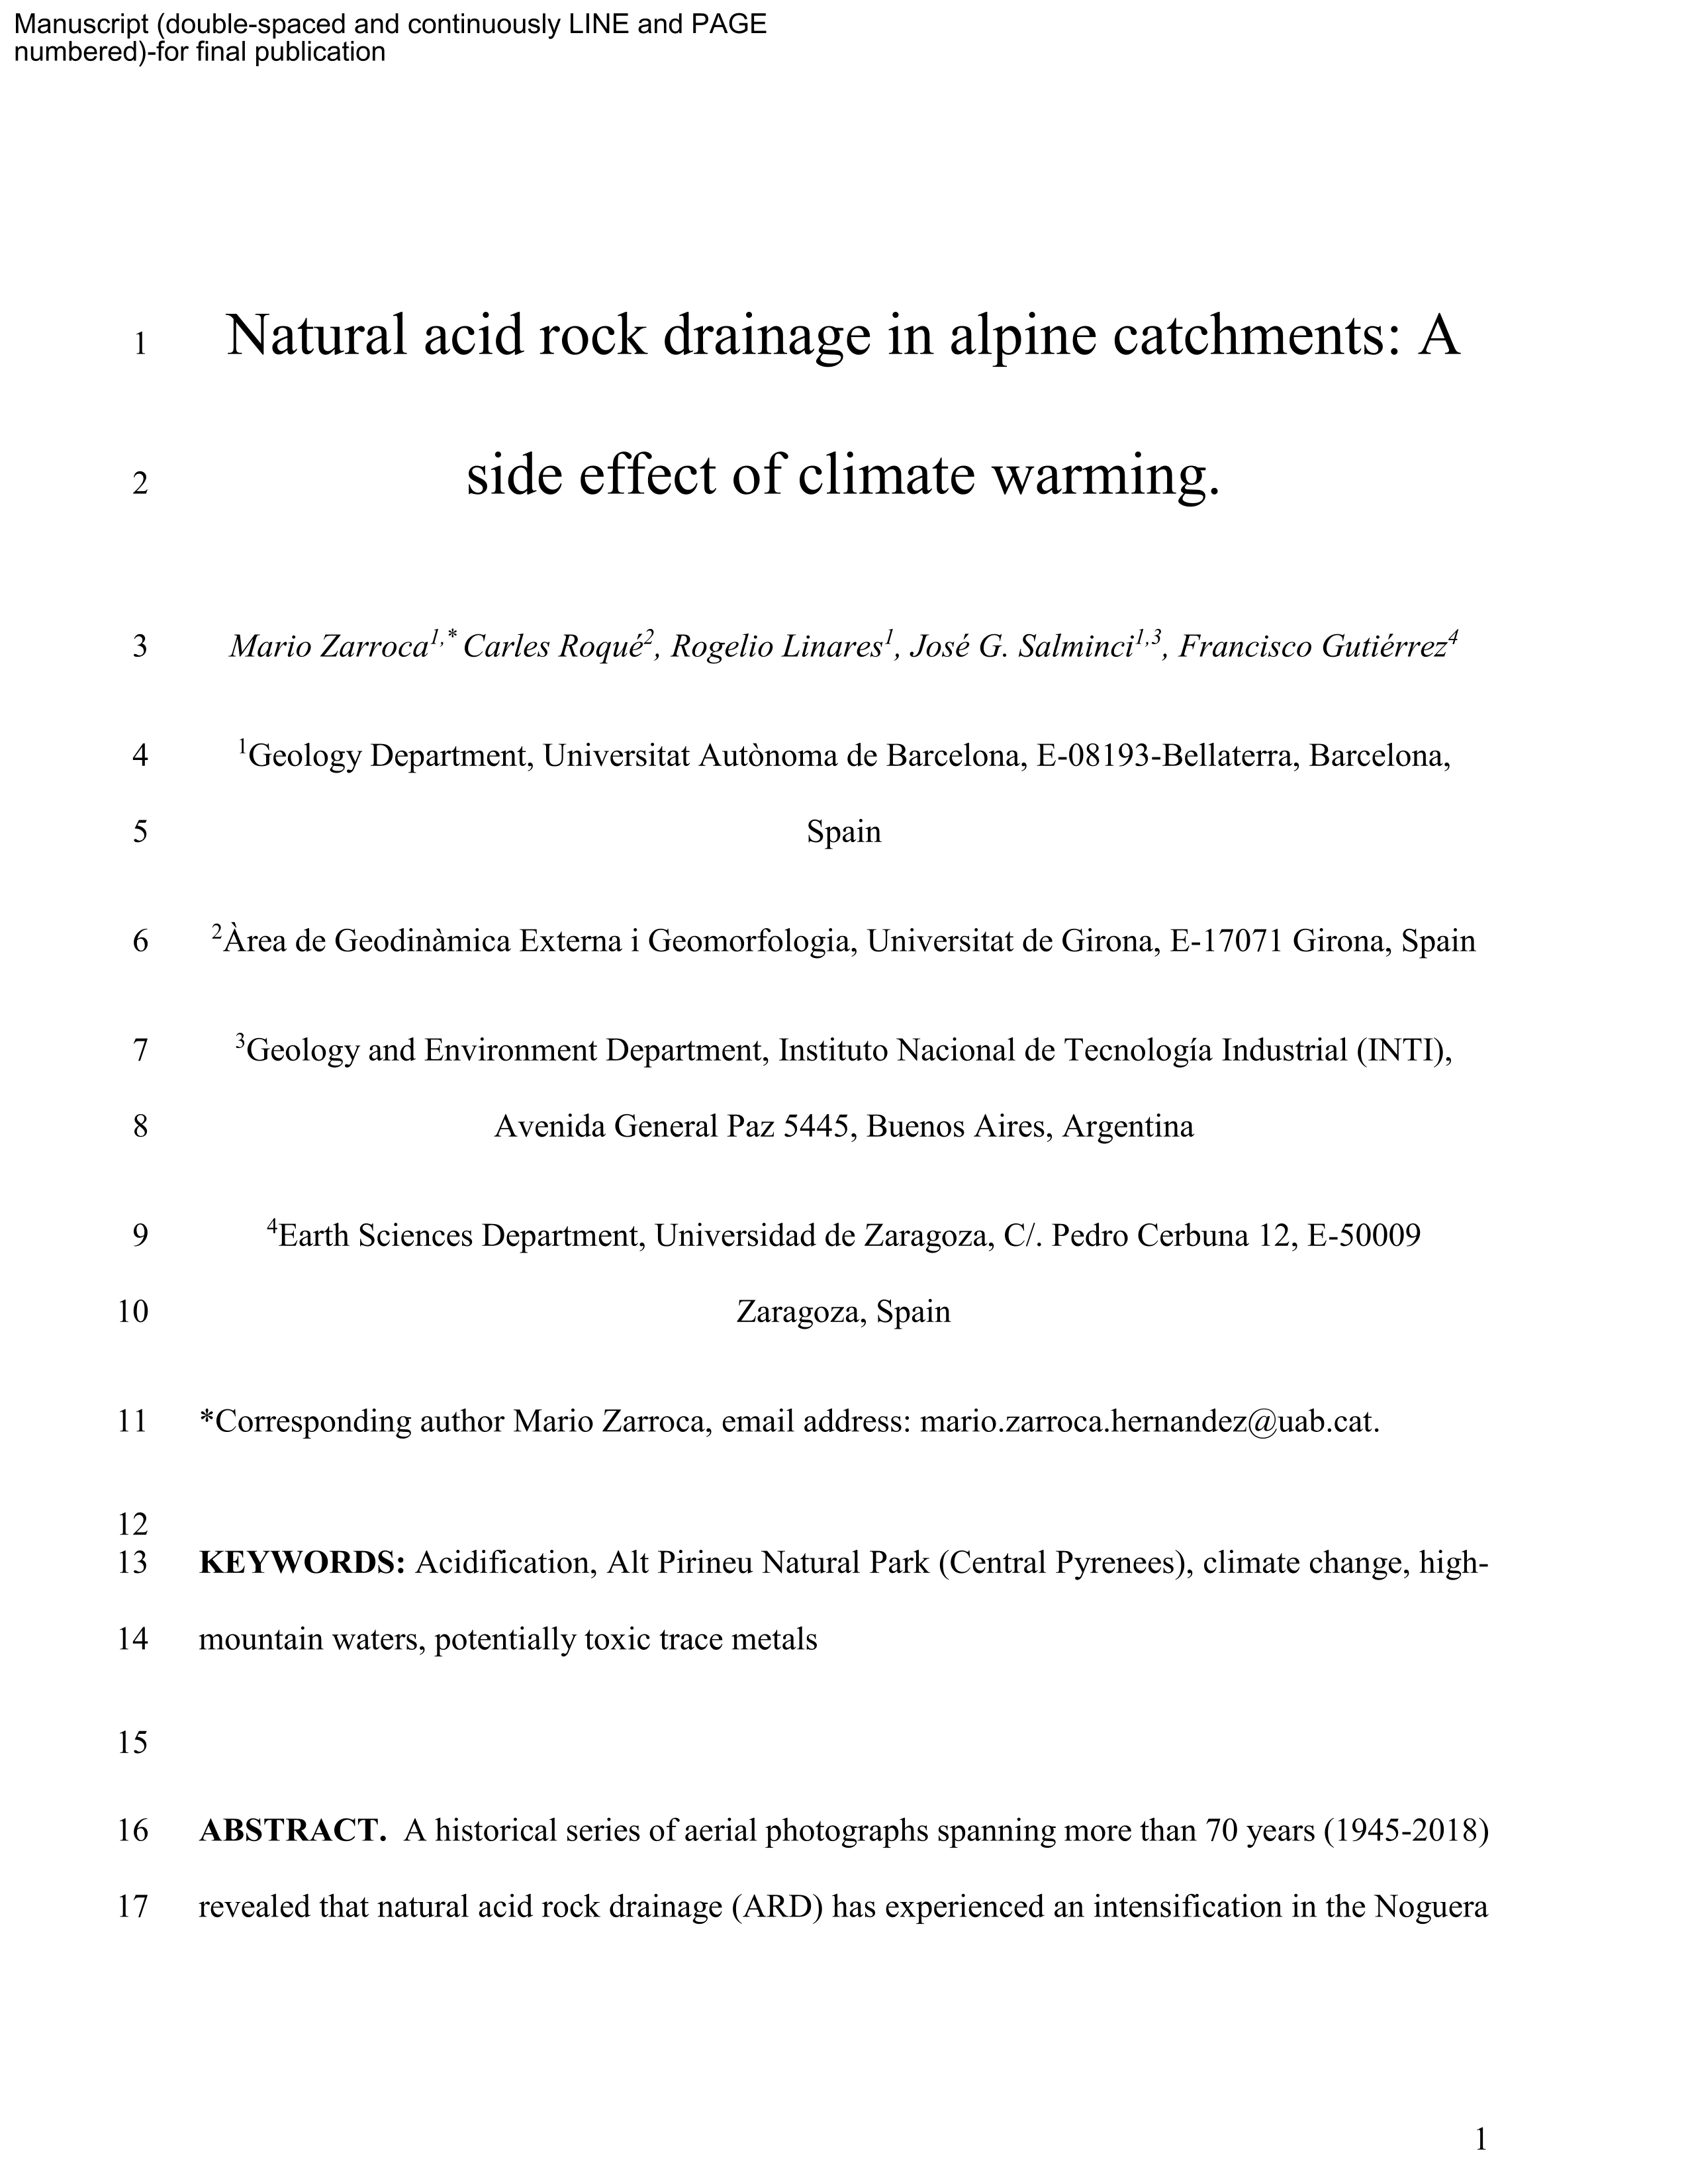 Natural acid rock drainage in alpine catchments: A side effect of climate warming